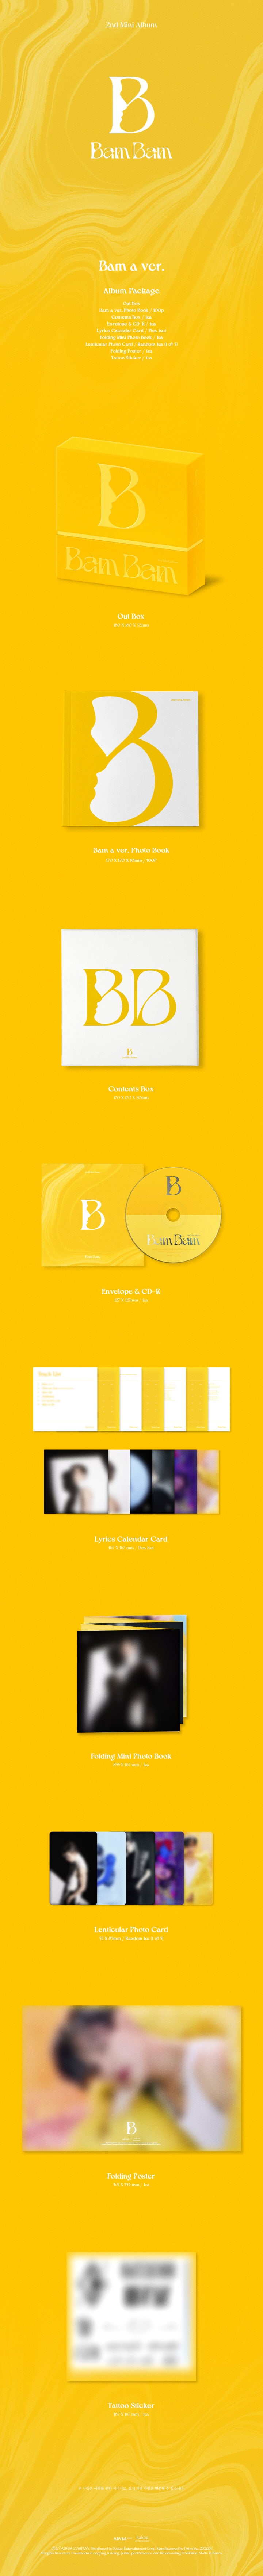 BamBam (BamBam) 2nd Mini Album [B] A world full of infinite possibilities that only BamBam has, [B] Melt slowly into your ...